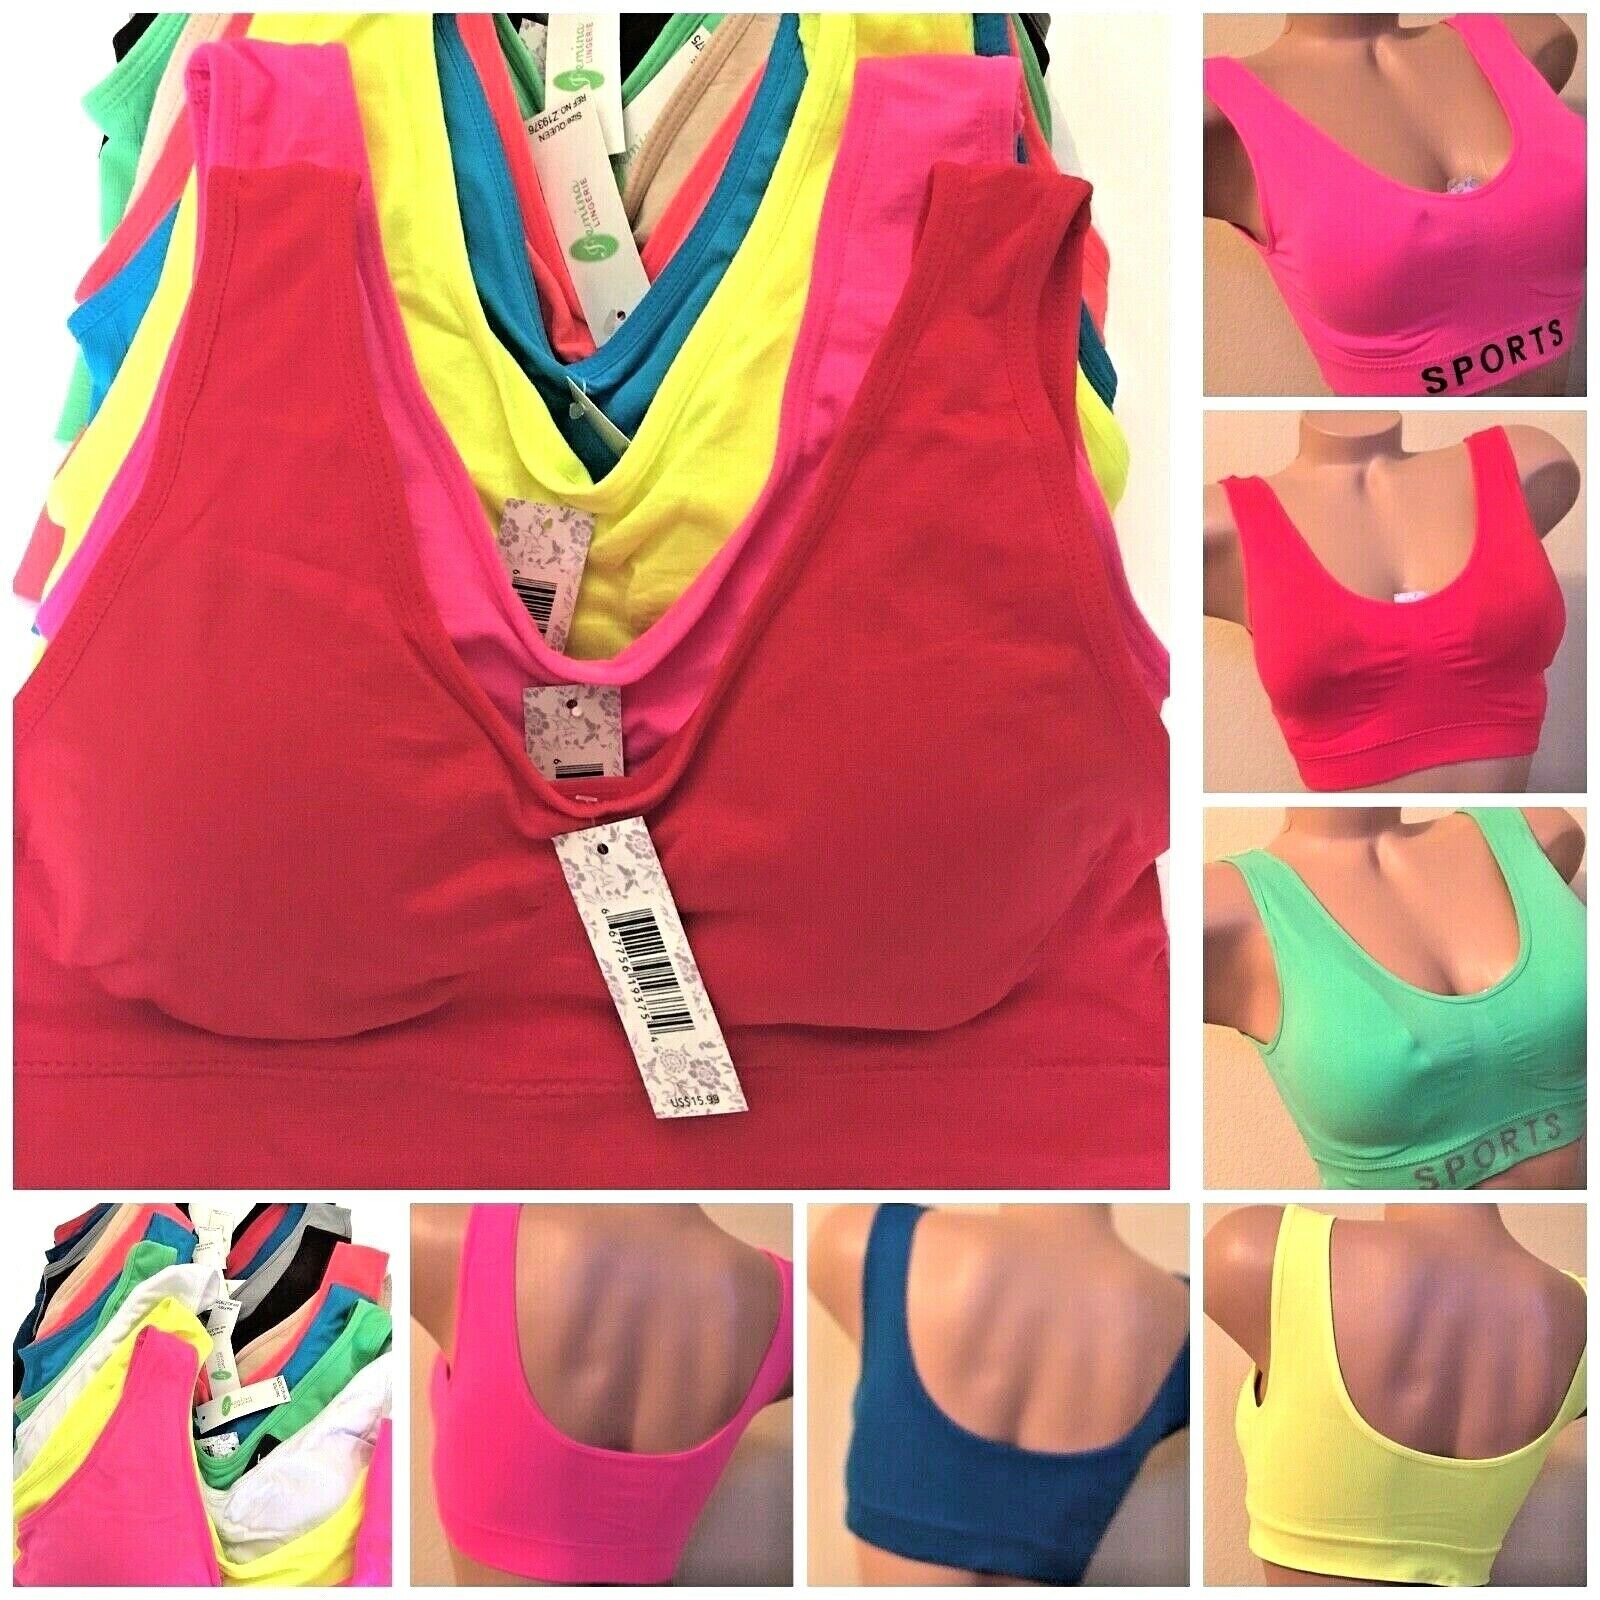 3- 6 Sport Bras Yoga Activewear Workout Seamless Top Camisole Miss Plus Size Lot